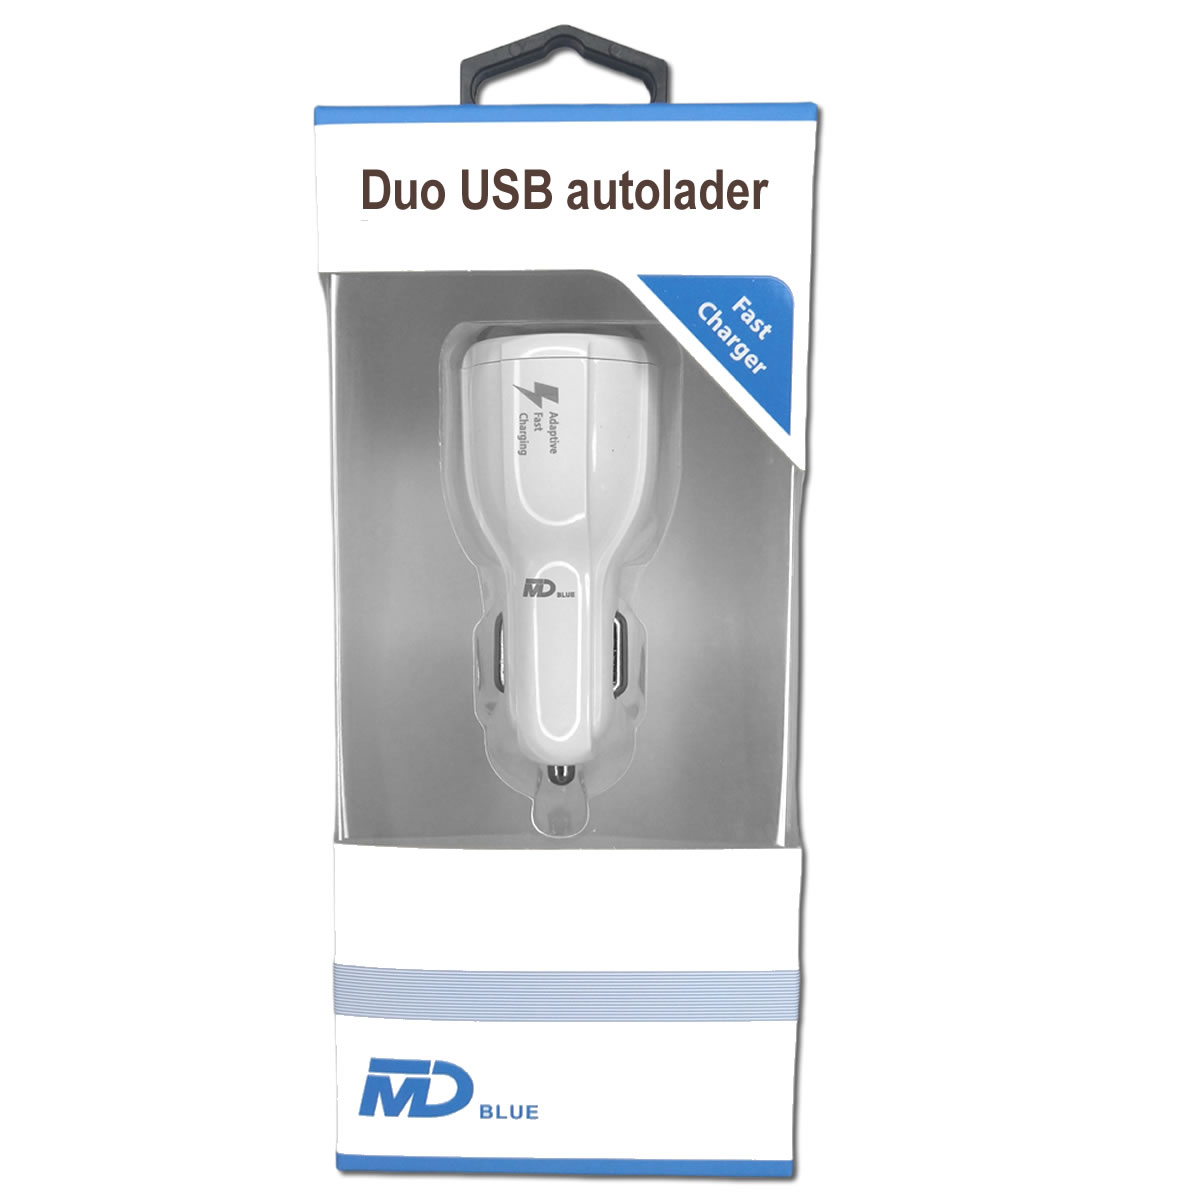 mdblue-auto-lader-duo-usb-A-wit-voorkant.jpg